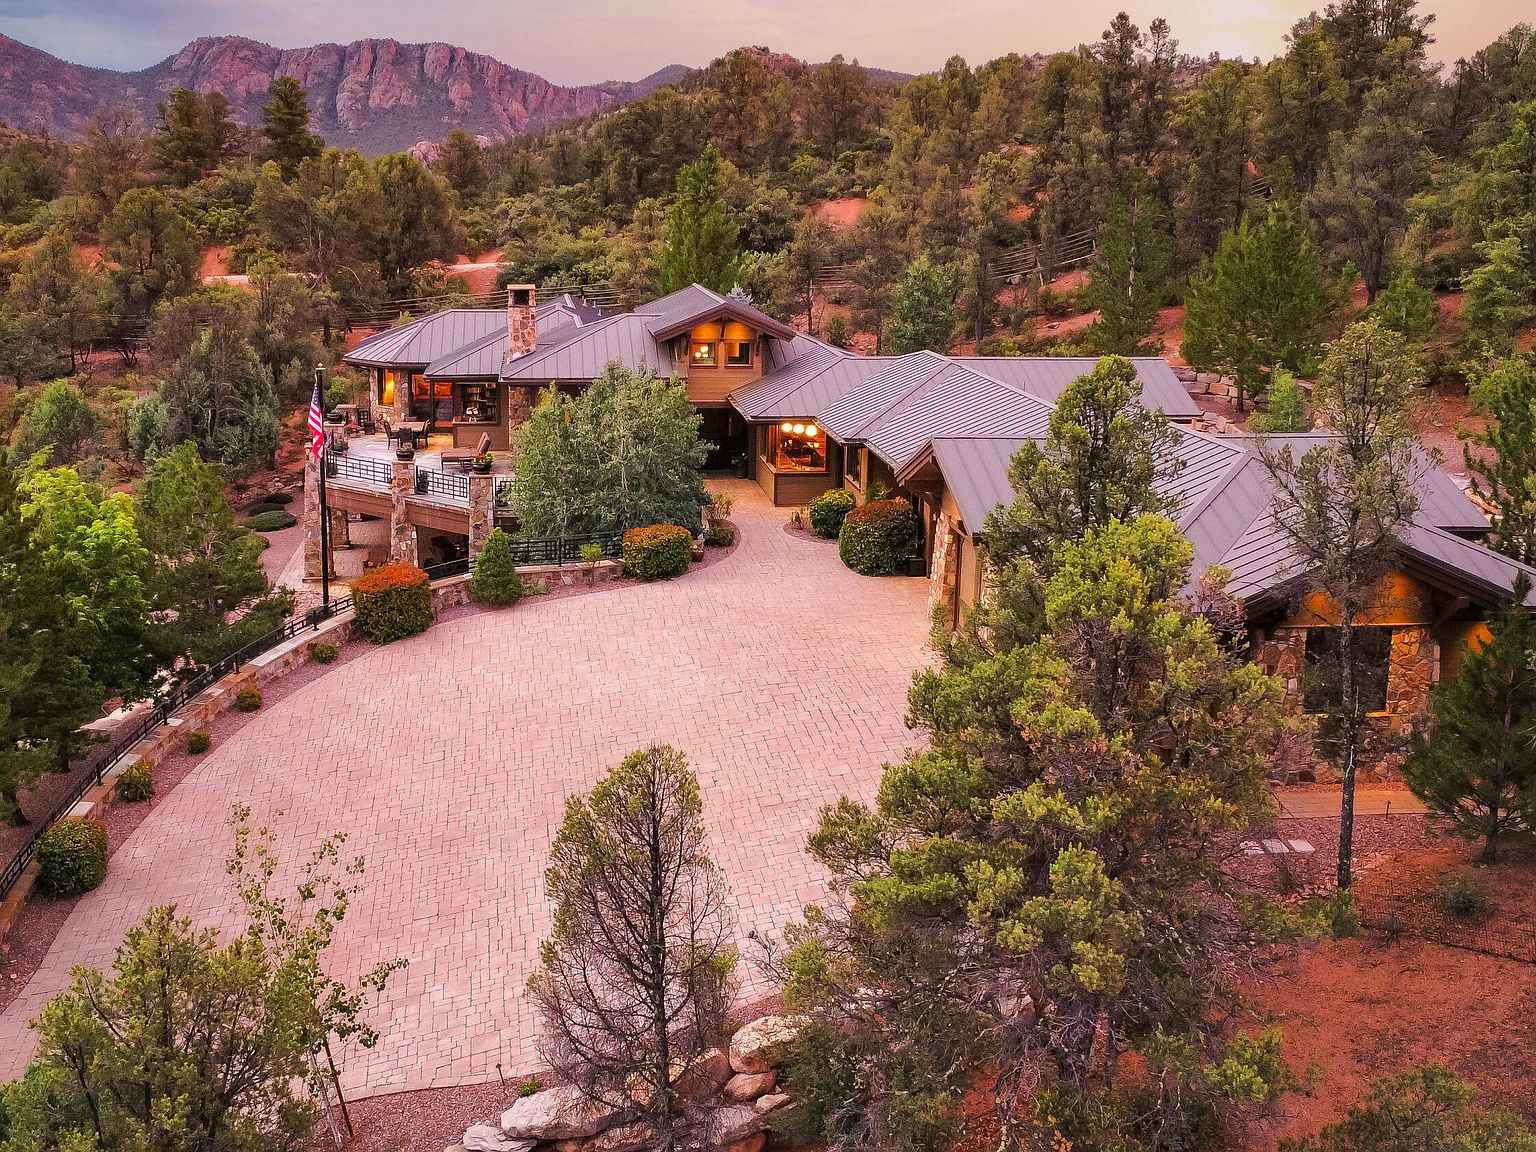 909 S Monument Valley Dr, Payson, AZ 85541 | Zillow